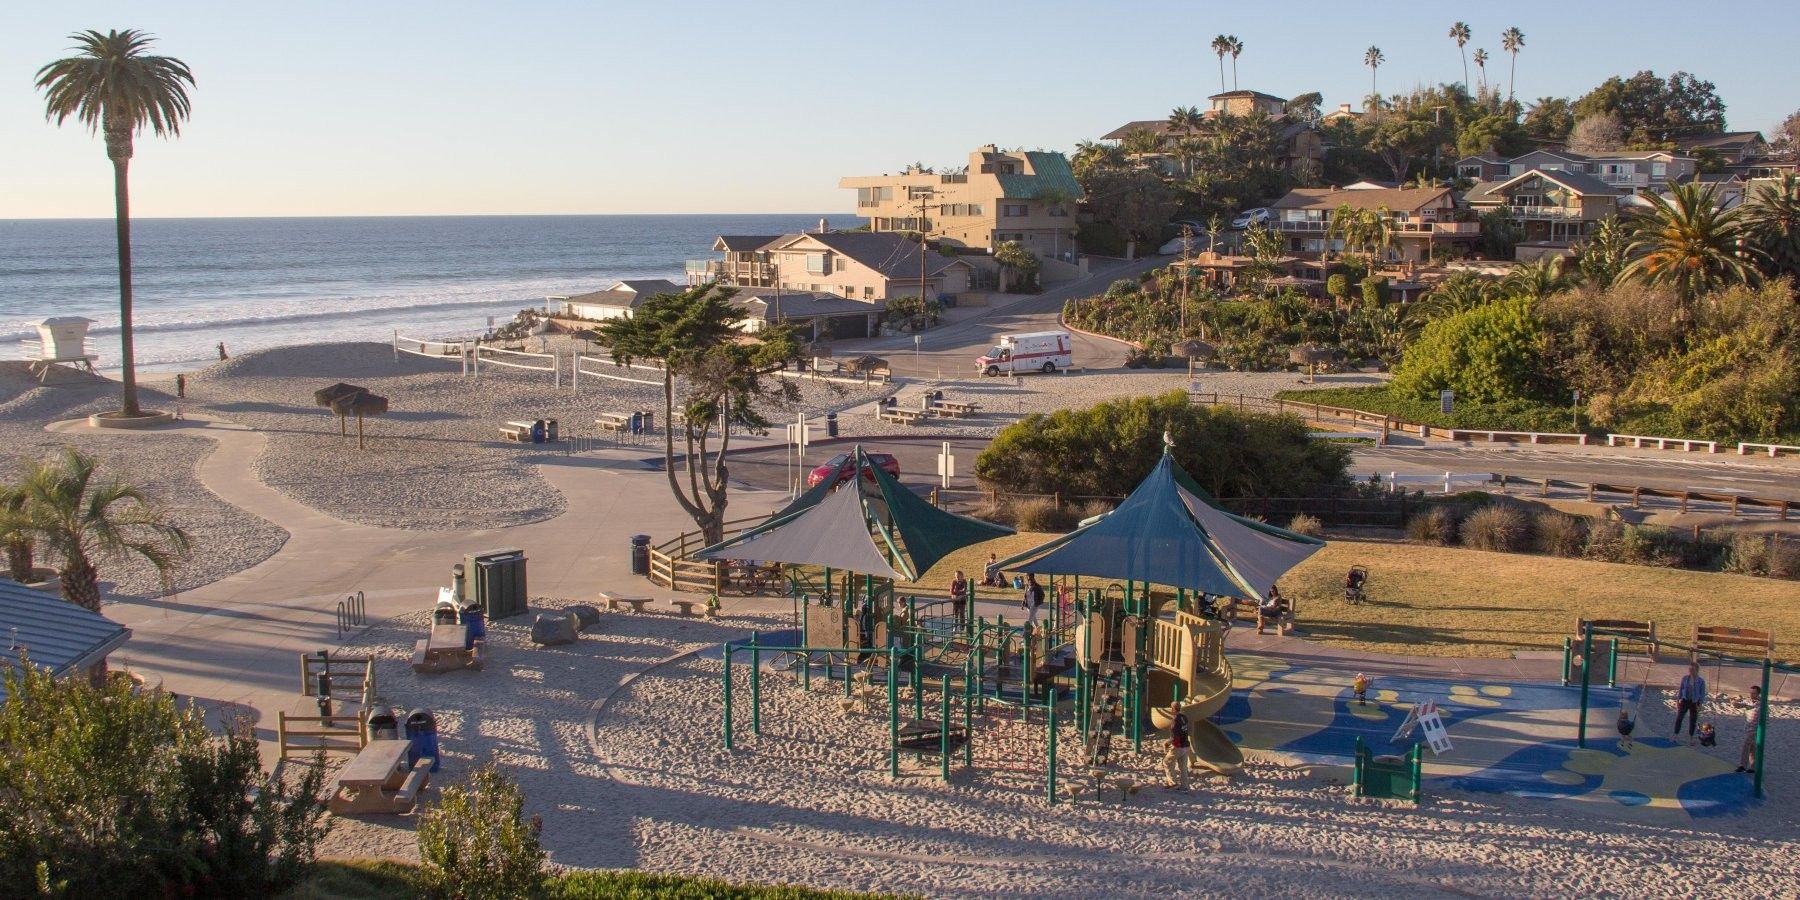 1581205839 488 The most beautiful beaches of San Diego - The most beautiful beaches of San Diego